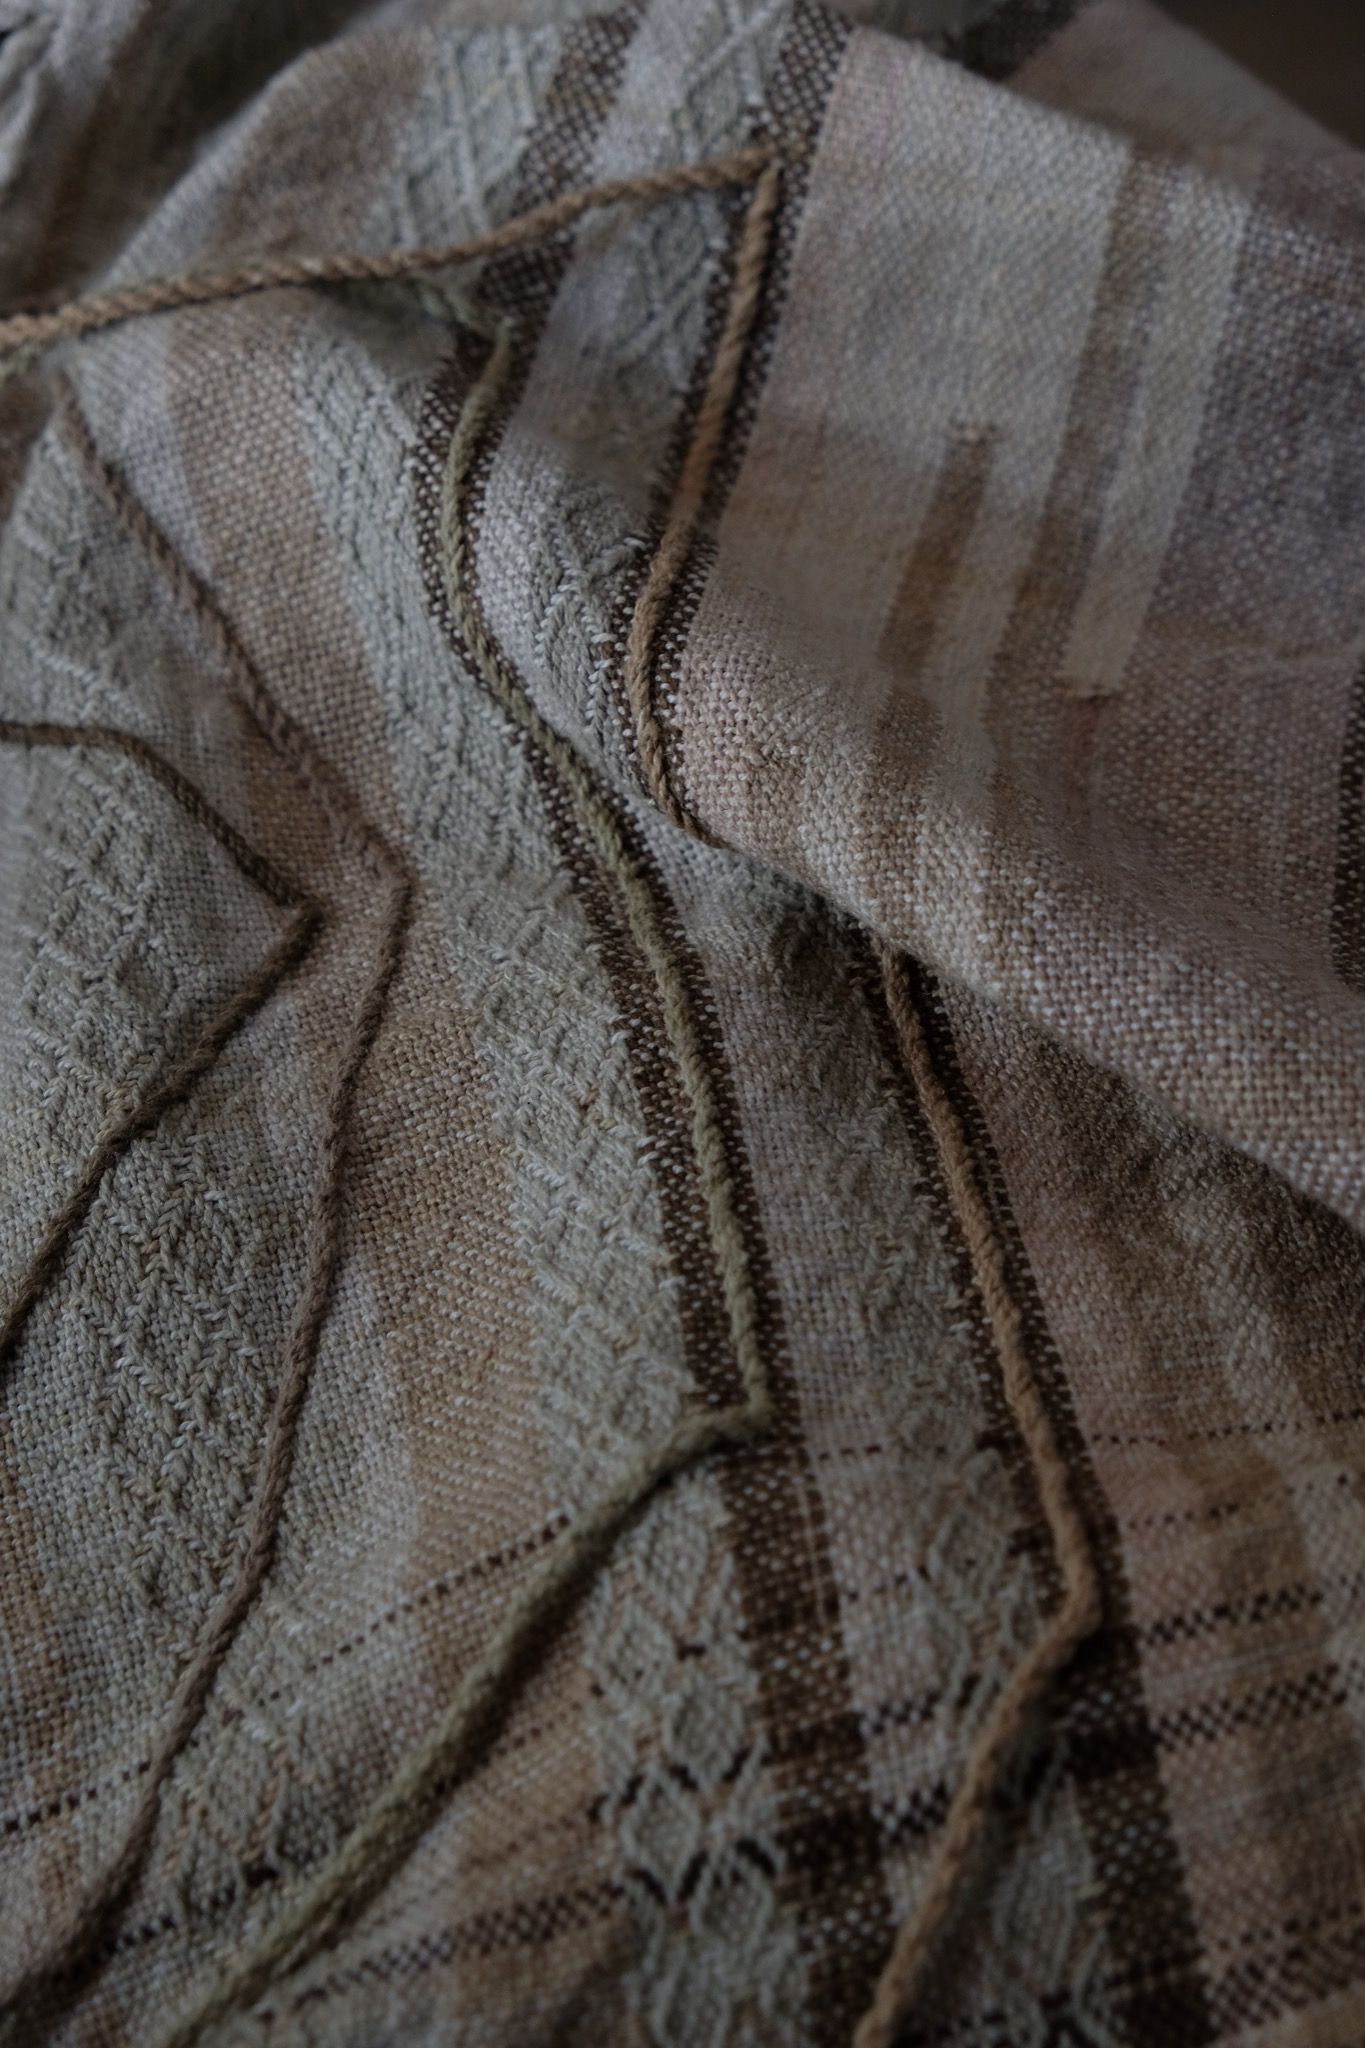 Handwoven fabric in soft shades of grey, pink, yellow and earth laying on a wooden floor